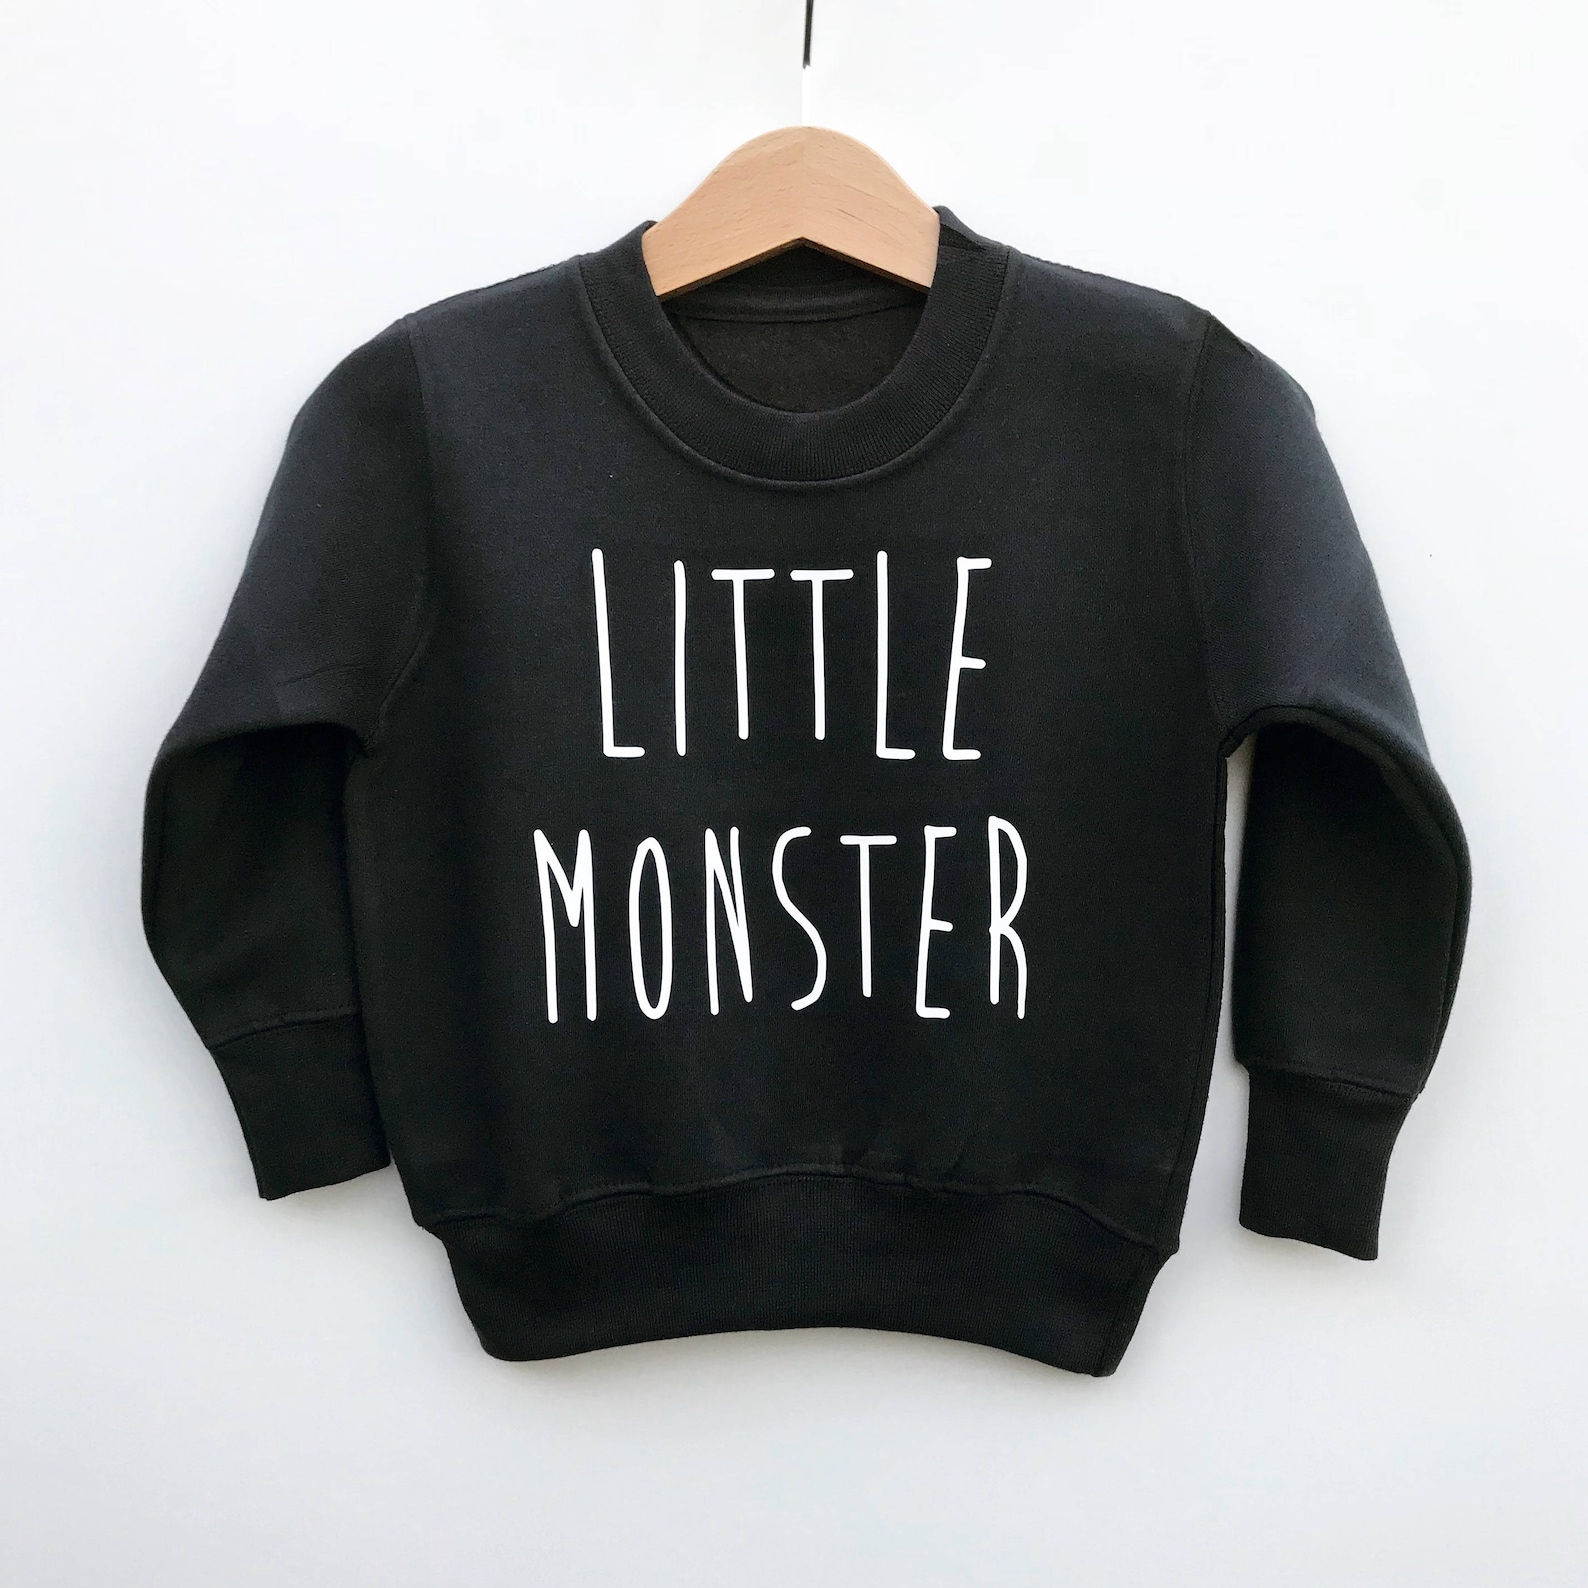 Like that baby monster текст. Better up Baby Monster одежда. Baby Monster Butter up фото одежды.